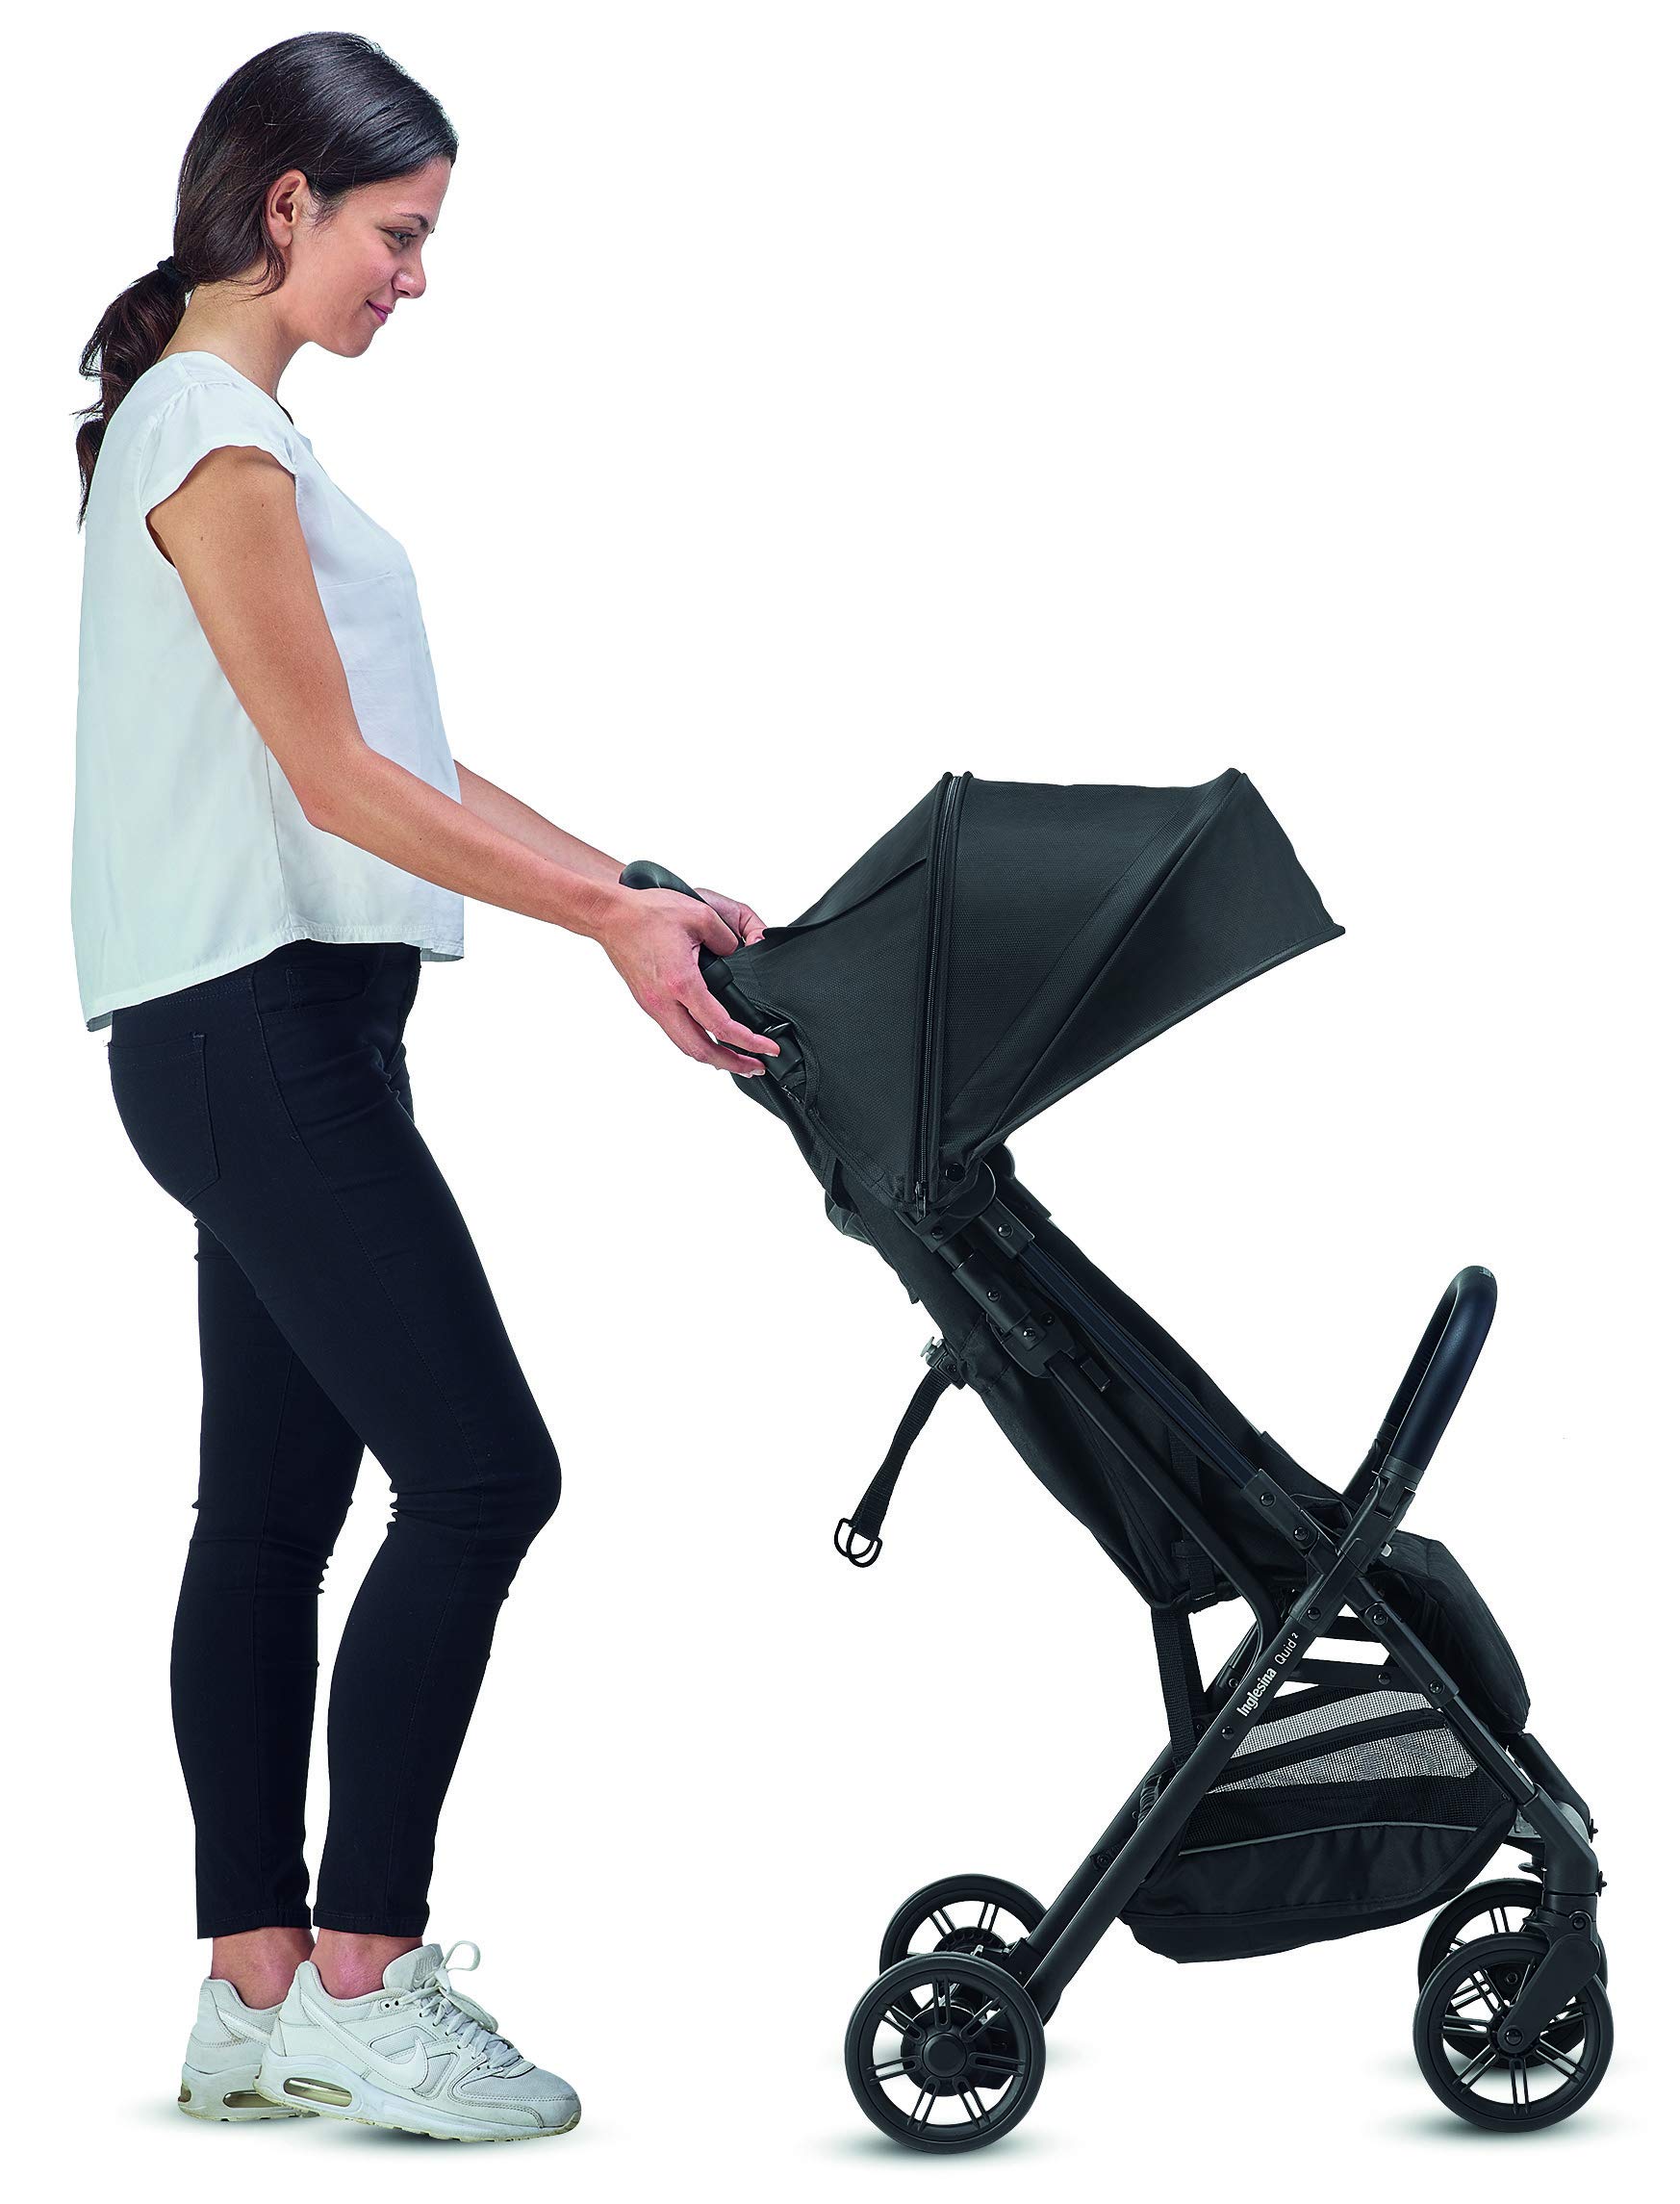 Inglesina Quid Baby Stroller - Lightweight at 13 lbs, Travel-Friendly, Ultra-Compact & Folding - Fits in Airplane Cabin & Overhead - for Toddlers from 3 Months to 50 lbs - Large Canopy, Stormy Gray